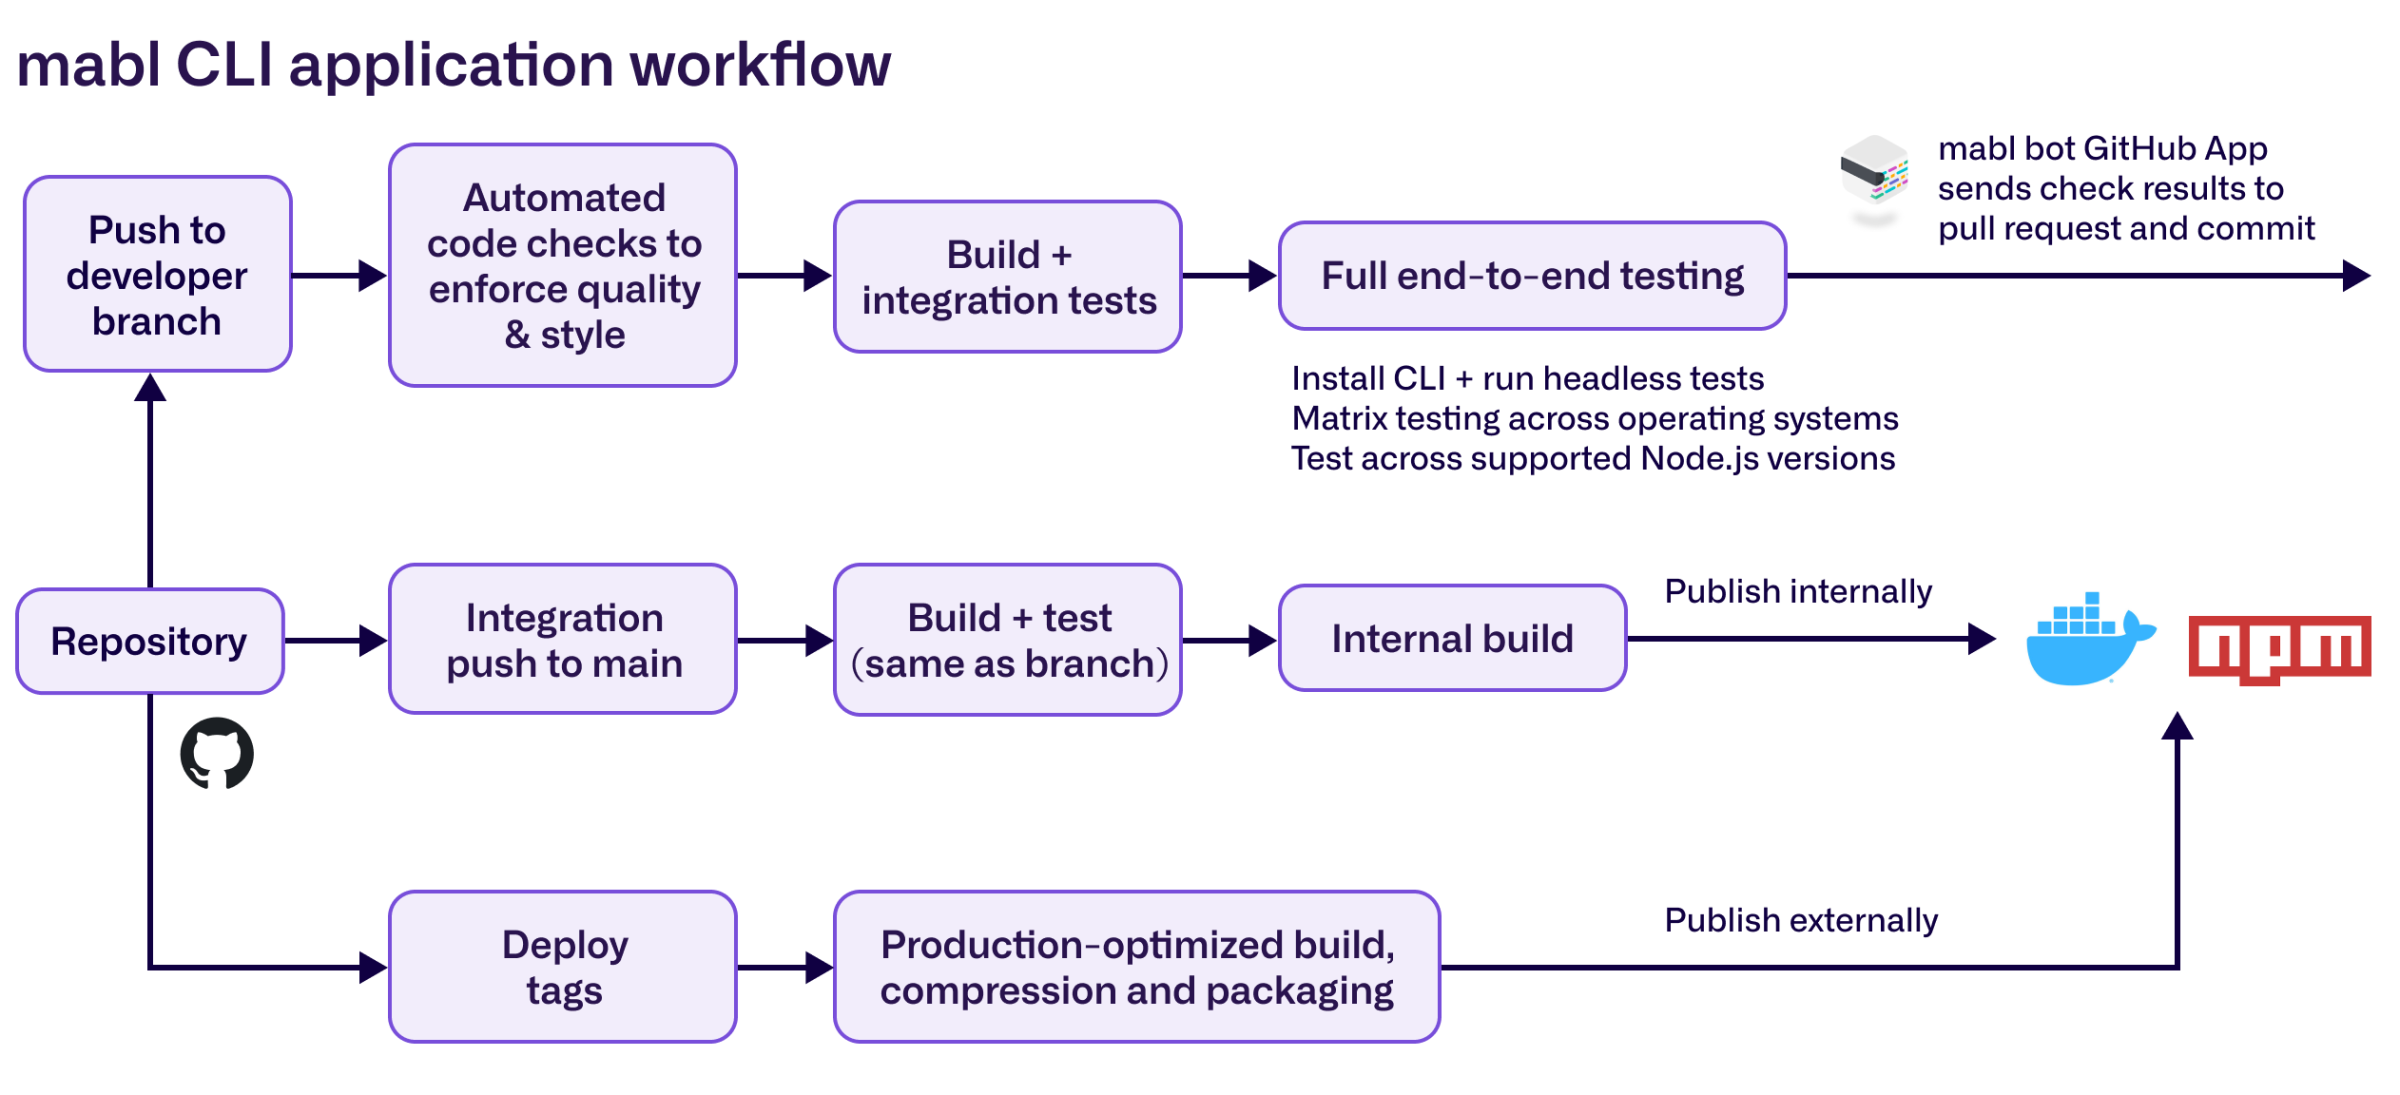 Diagram of mabl CLI application workflow